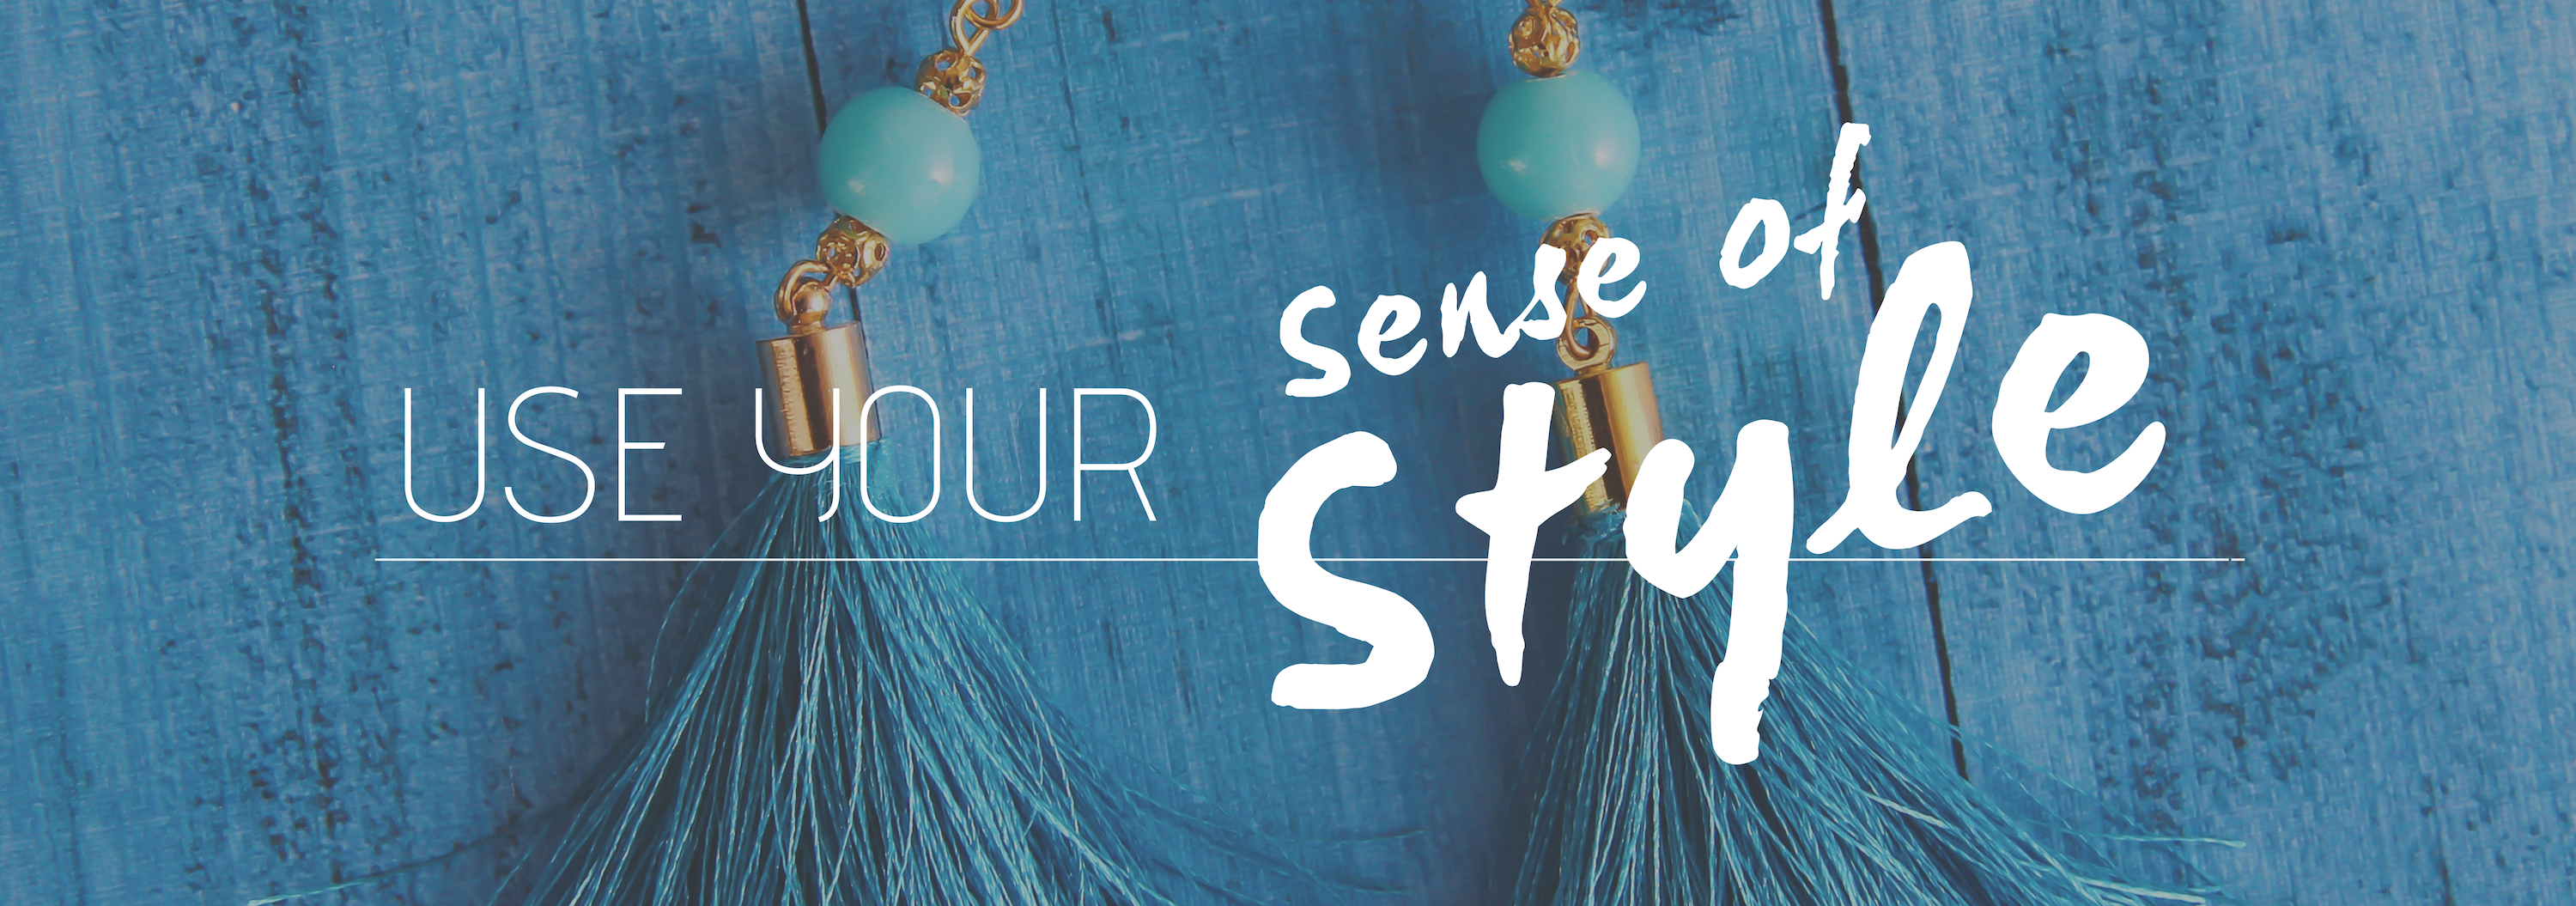 Use your sense of style